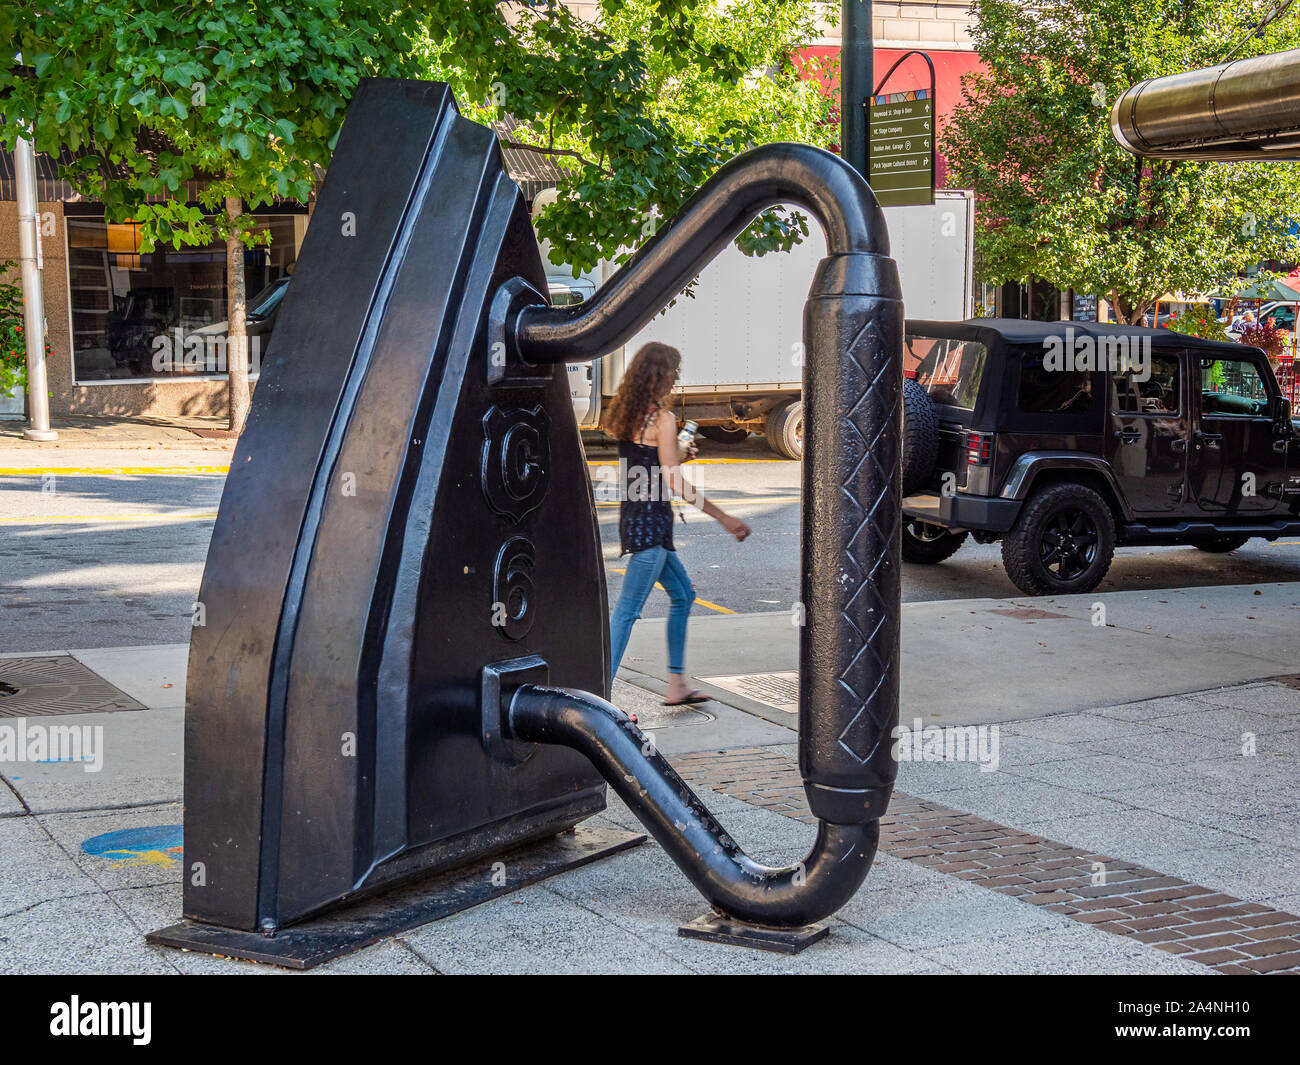 Flat Iron sculture in downtown Asheville North Carolina Stock Photo